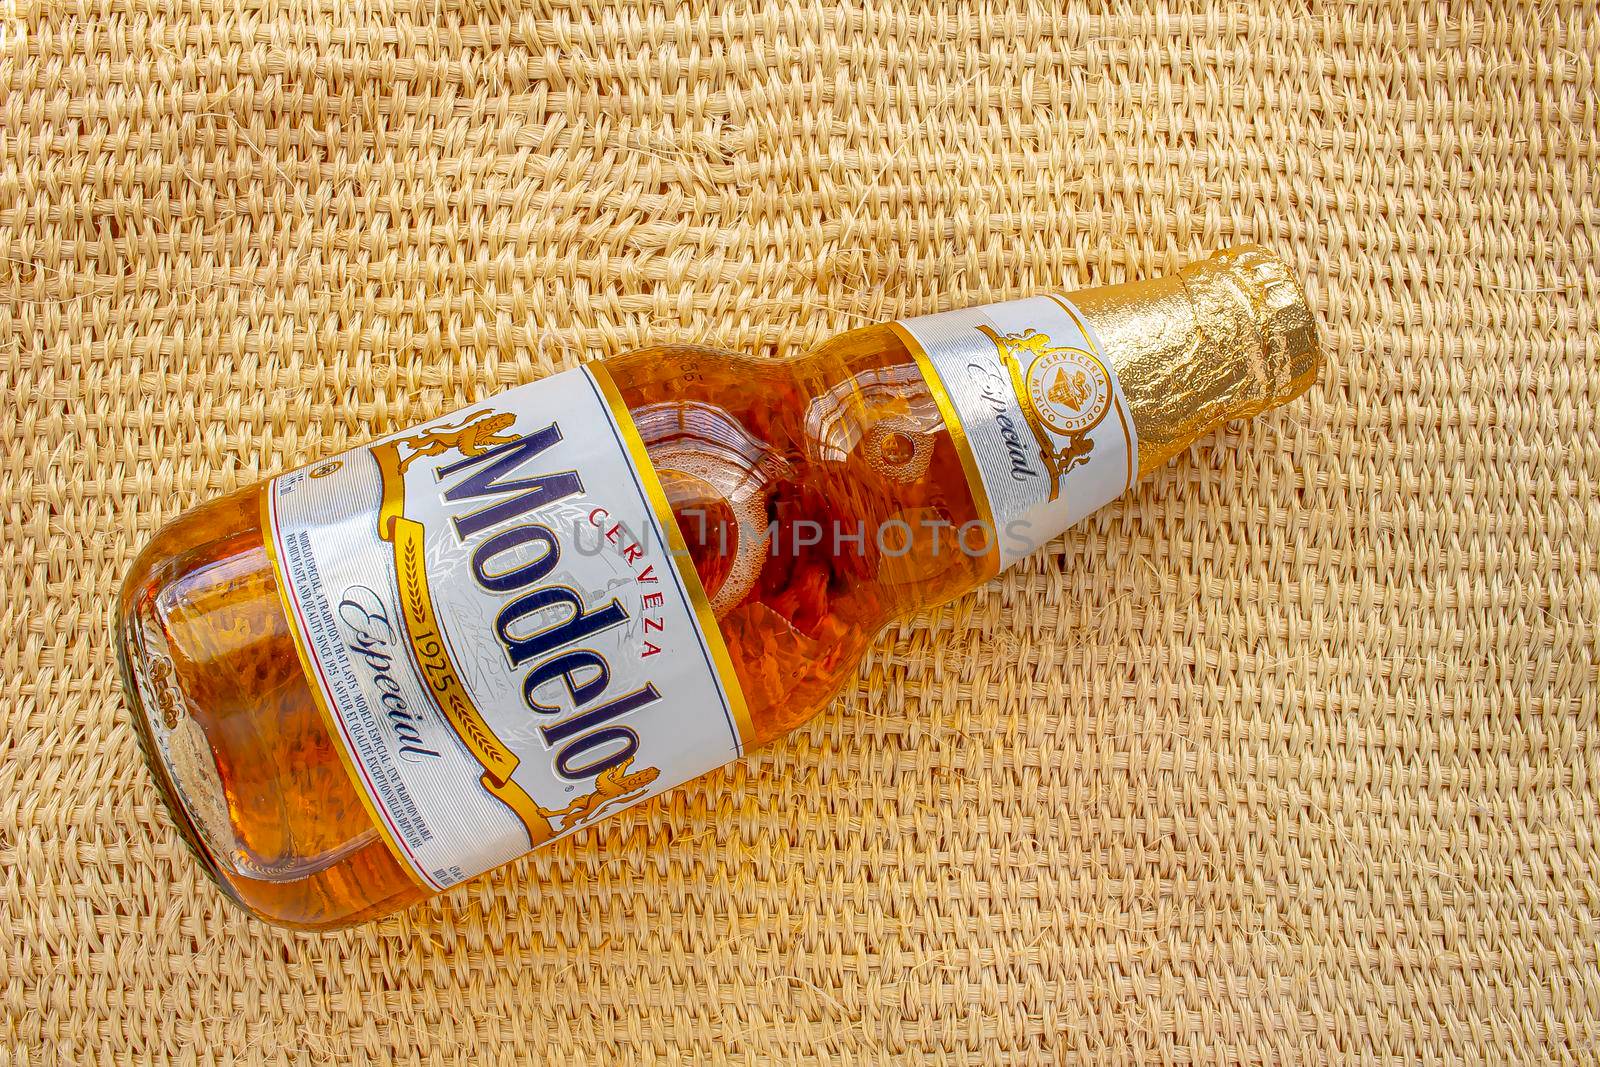 Calgary, Alberta, Canada. May 1, 2020. Modelo Especial beer bottle clear bright yellow colour on a on a straw rural bag background texture by oasisamuel